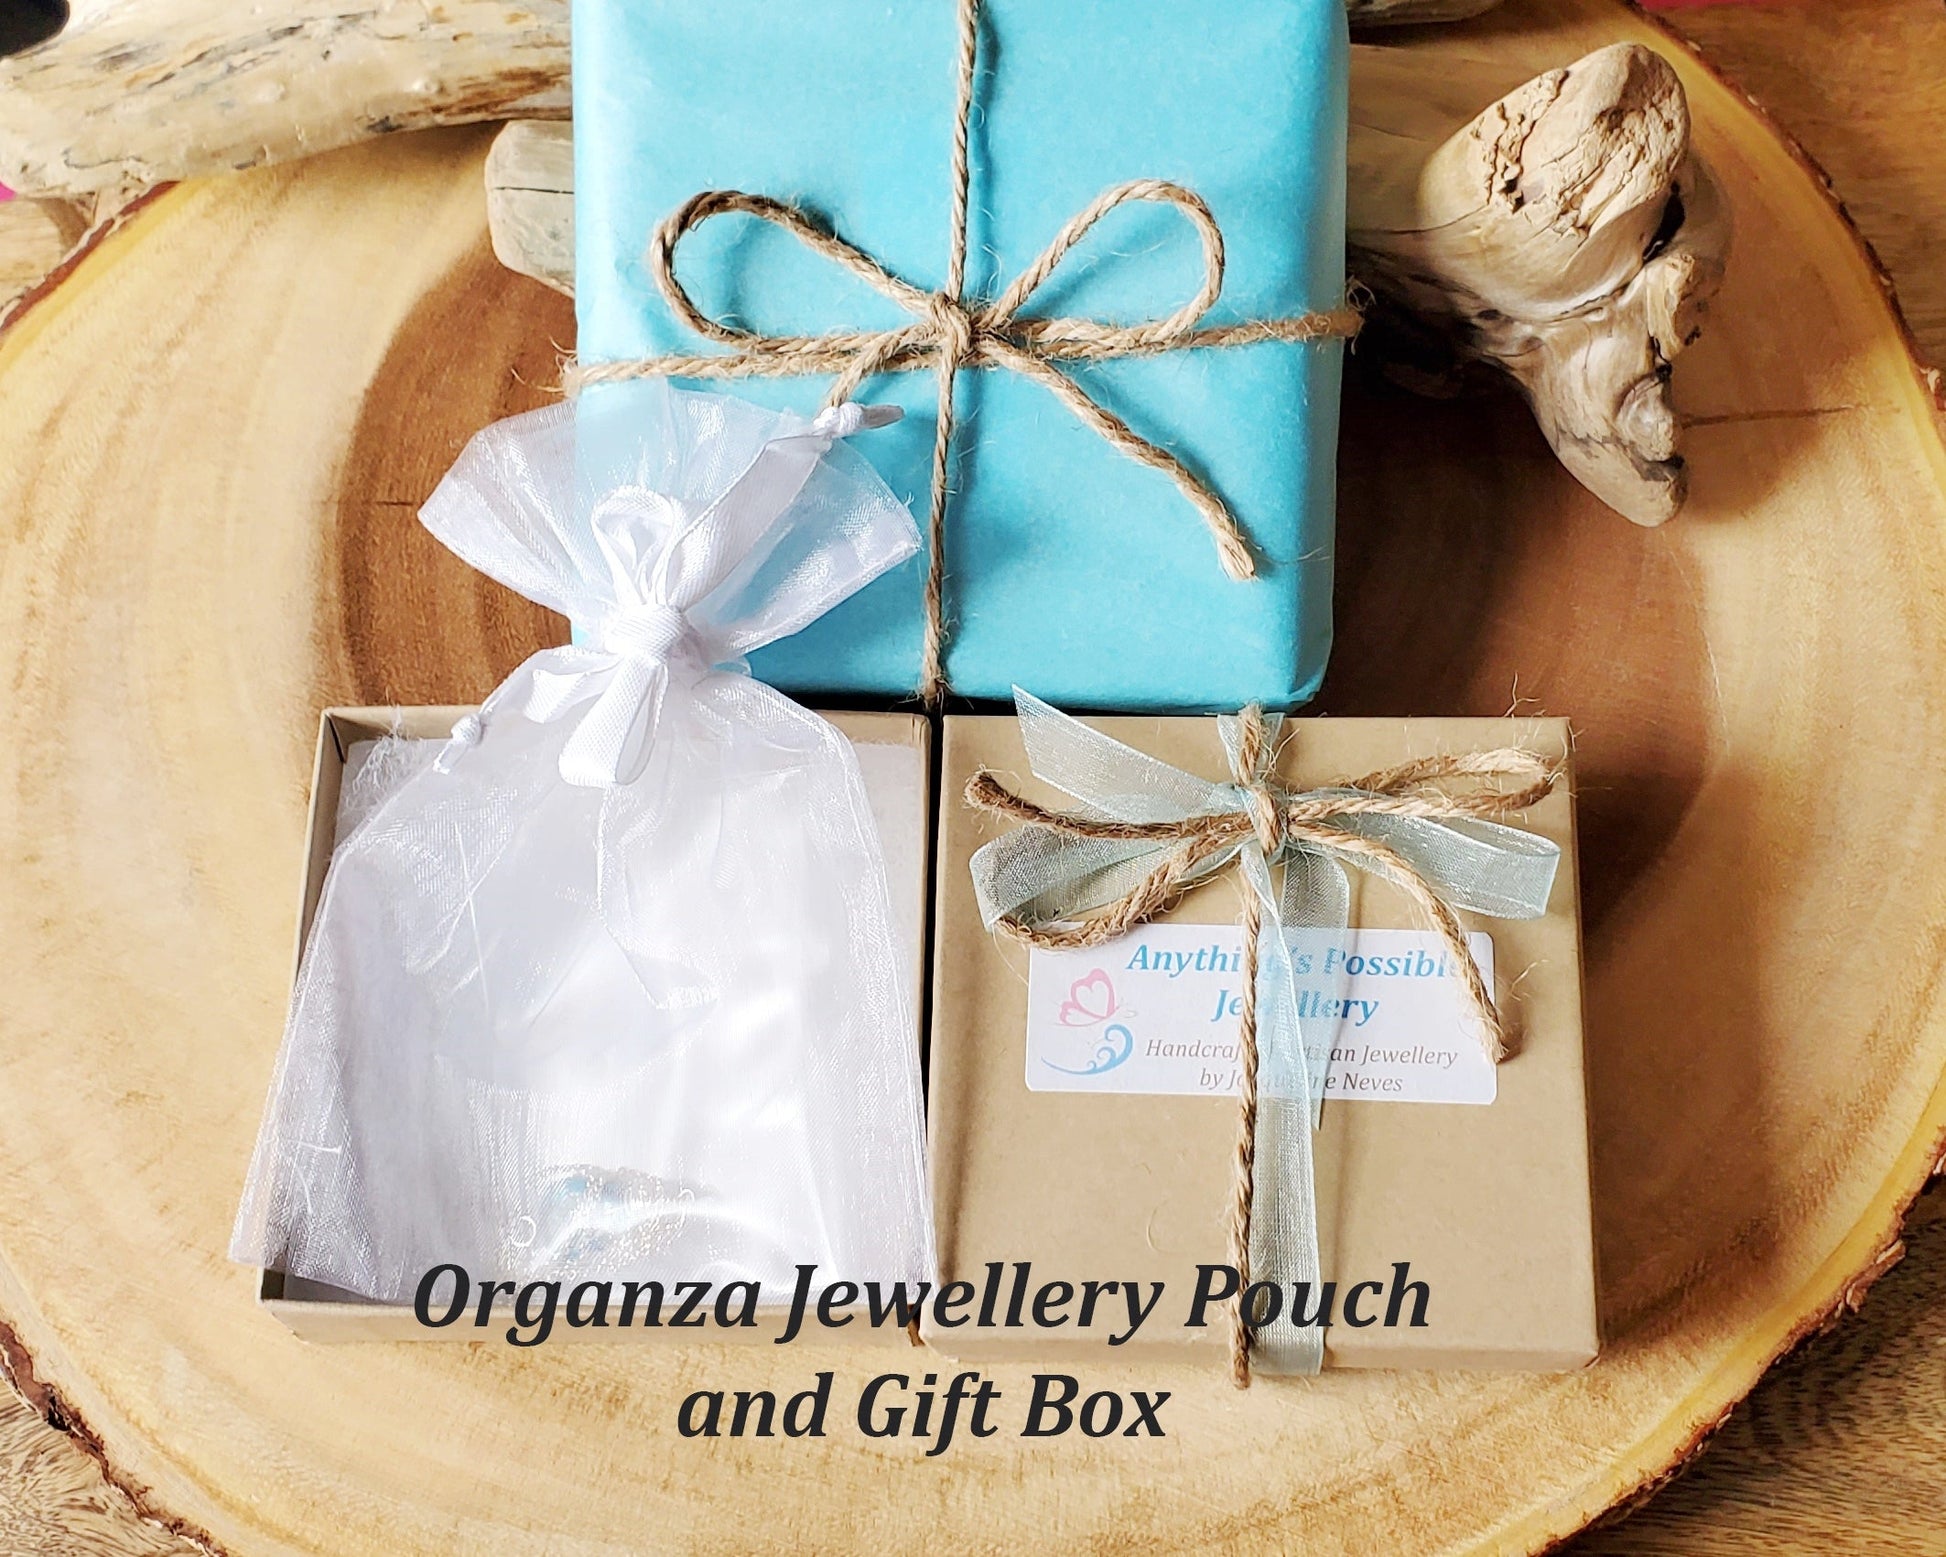  Eco Friendlier Recycled Paper Gift Box, Reusable White Organza Jewellery Pouch, Tissue Paper, Ribbon, and Twine